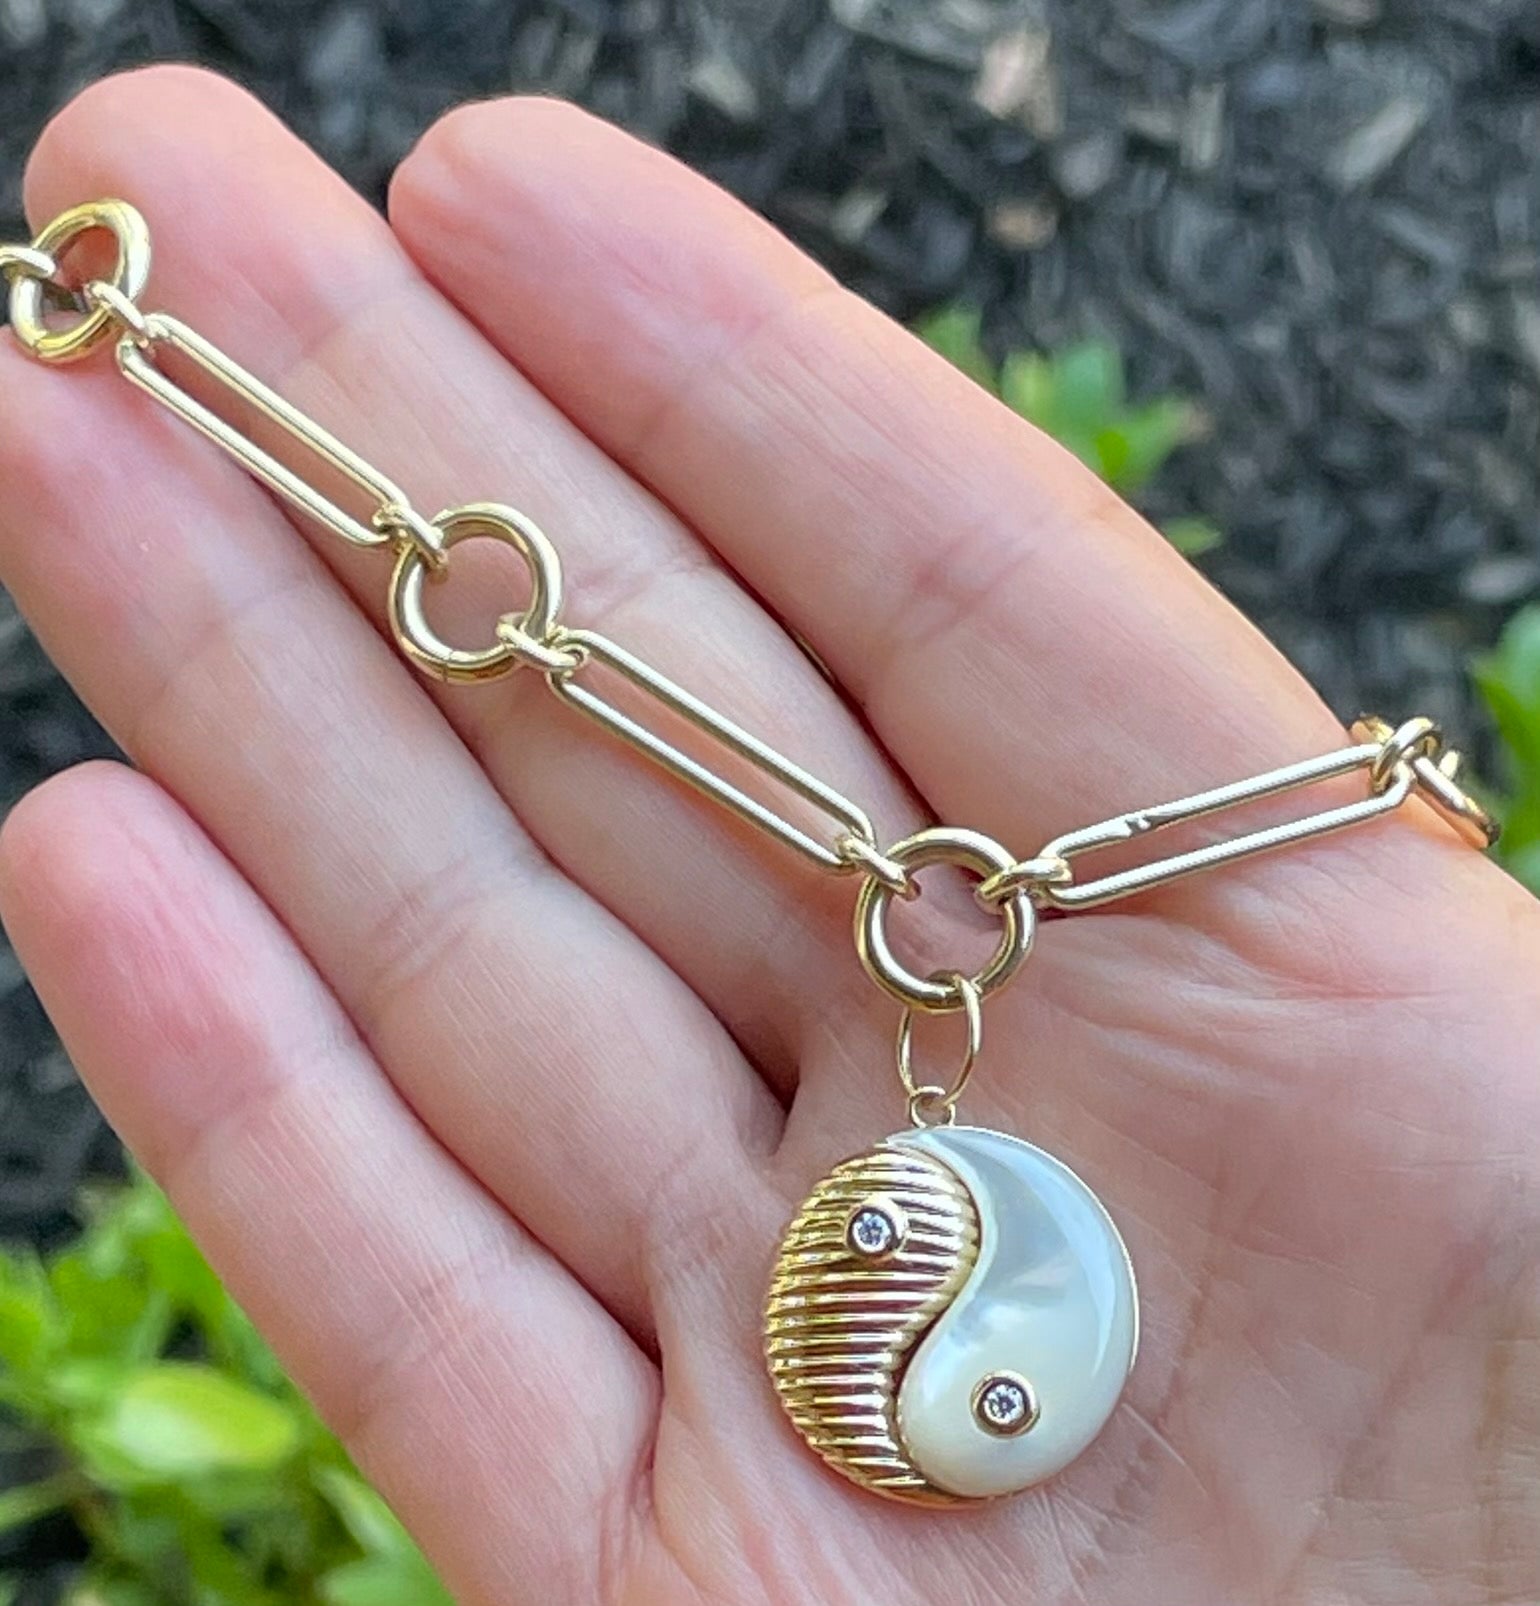 This beautiful yin and yang pendant is a symbol of harmony and balance. 